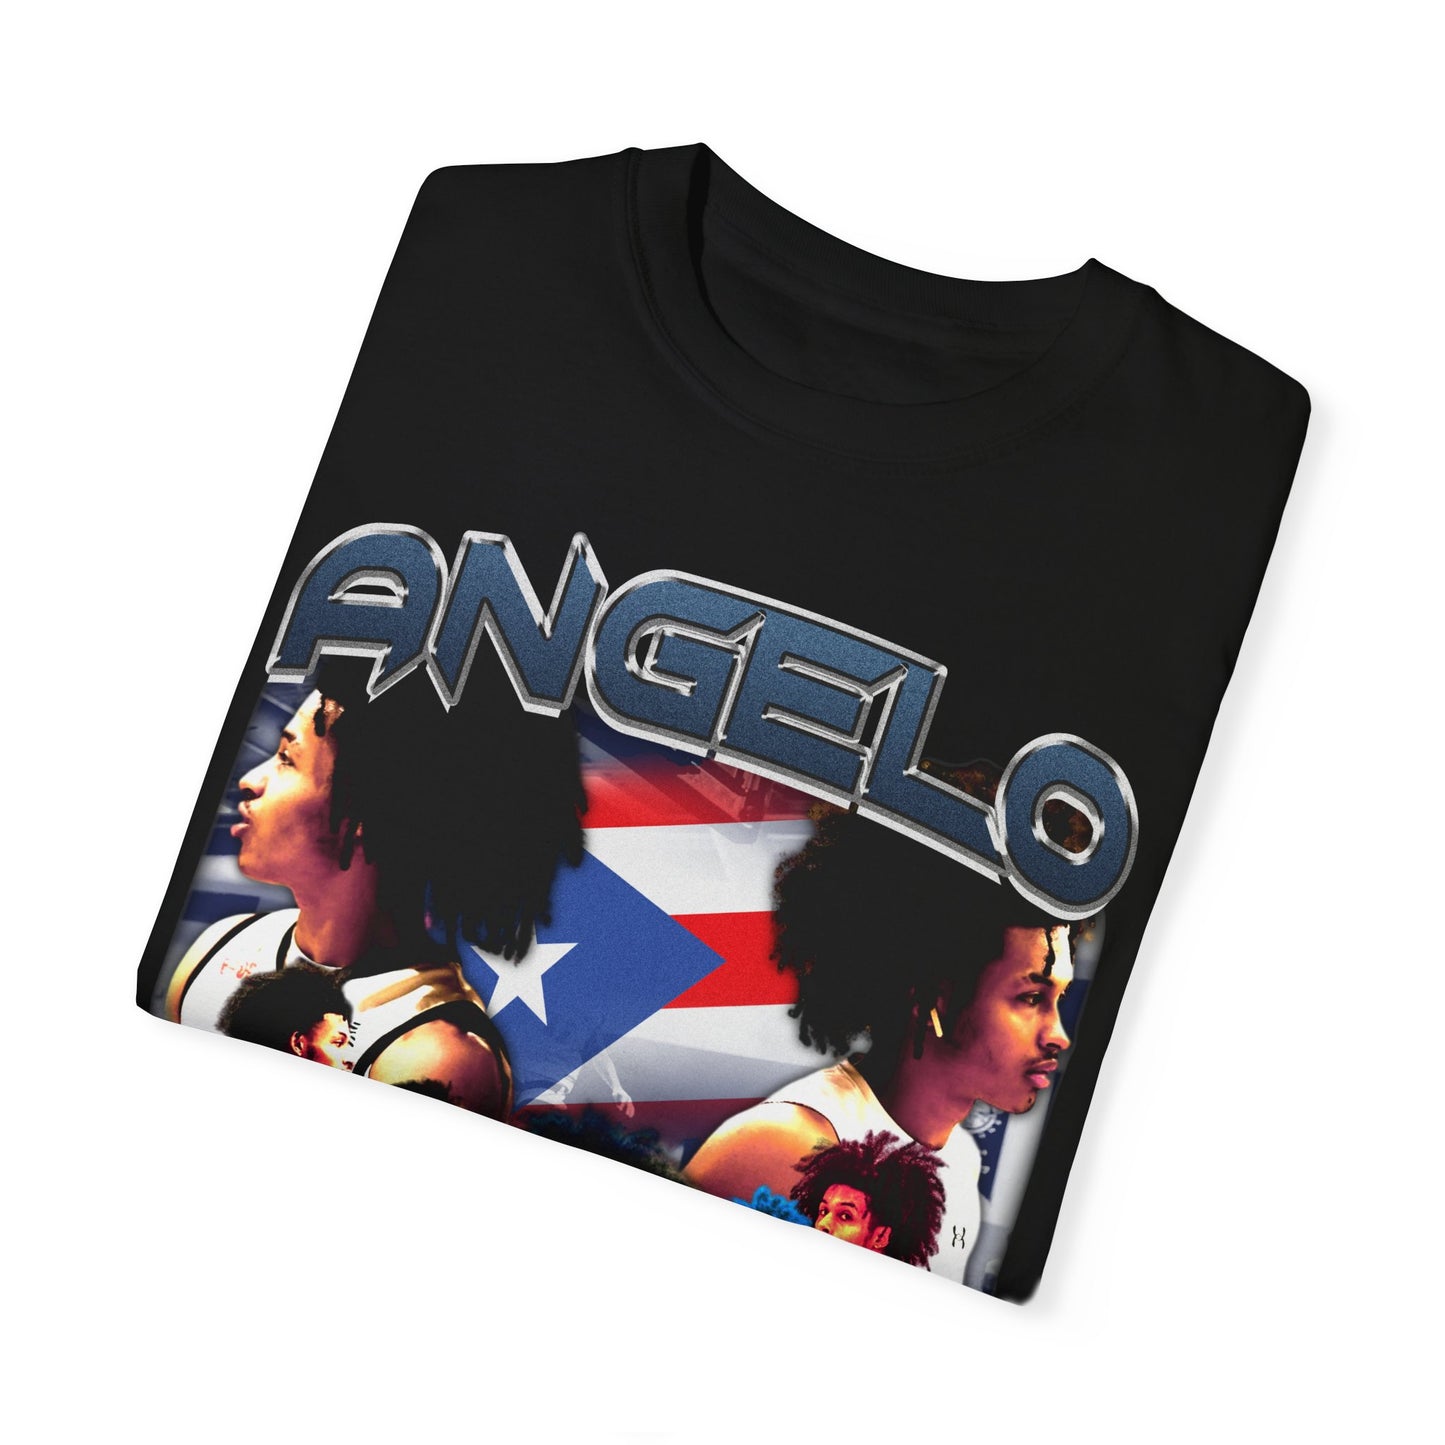 Angelo Torres Graphic T-shirt